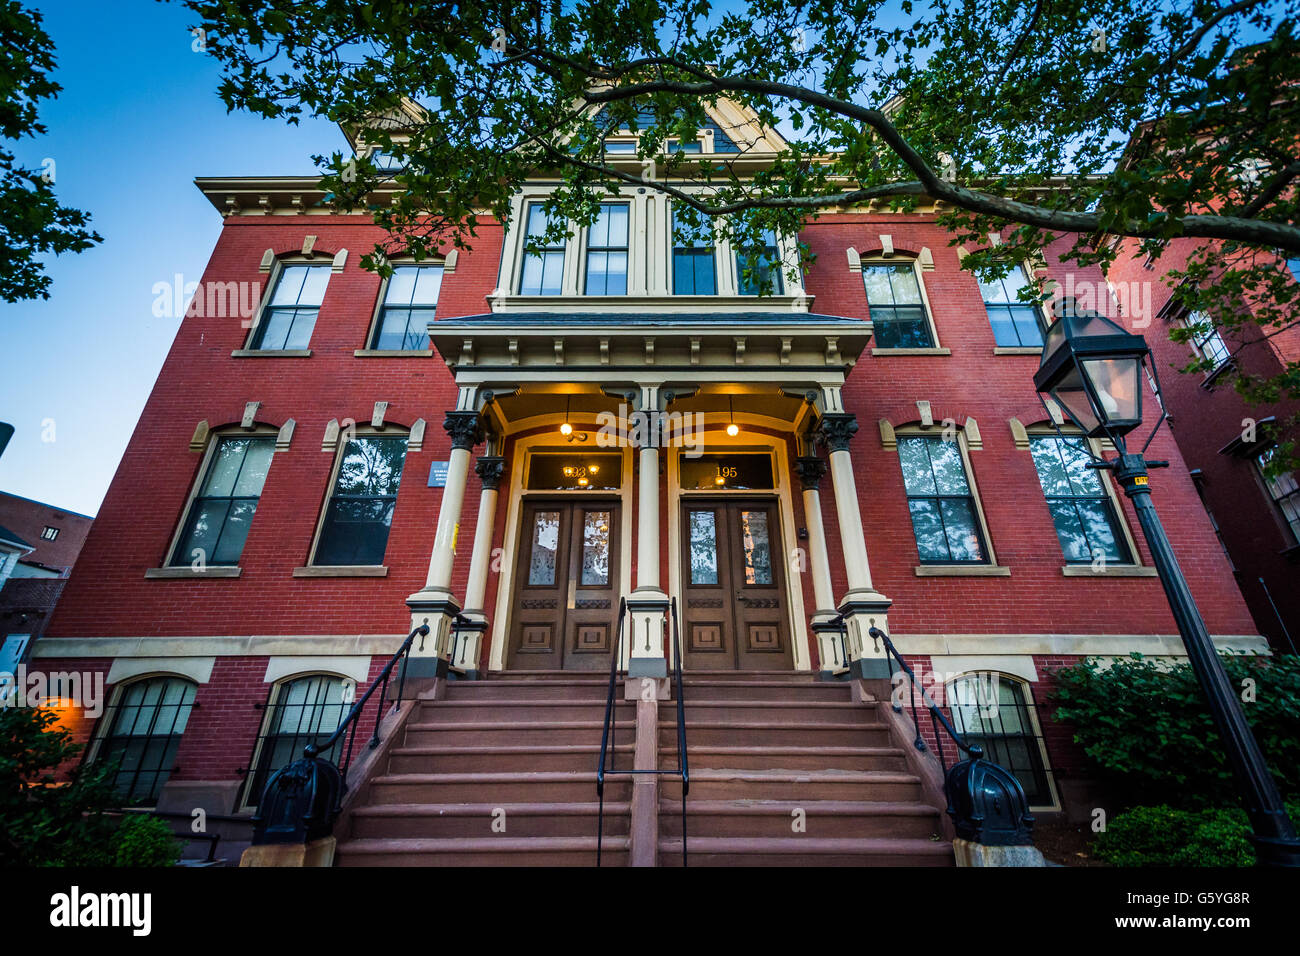 The Dwight House at the Rhode Island School of Design in Providence, Rhode Island. Stock Photo